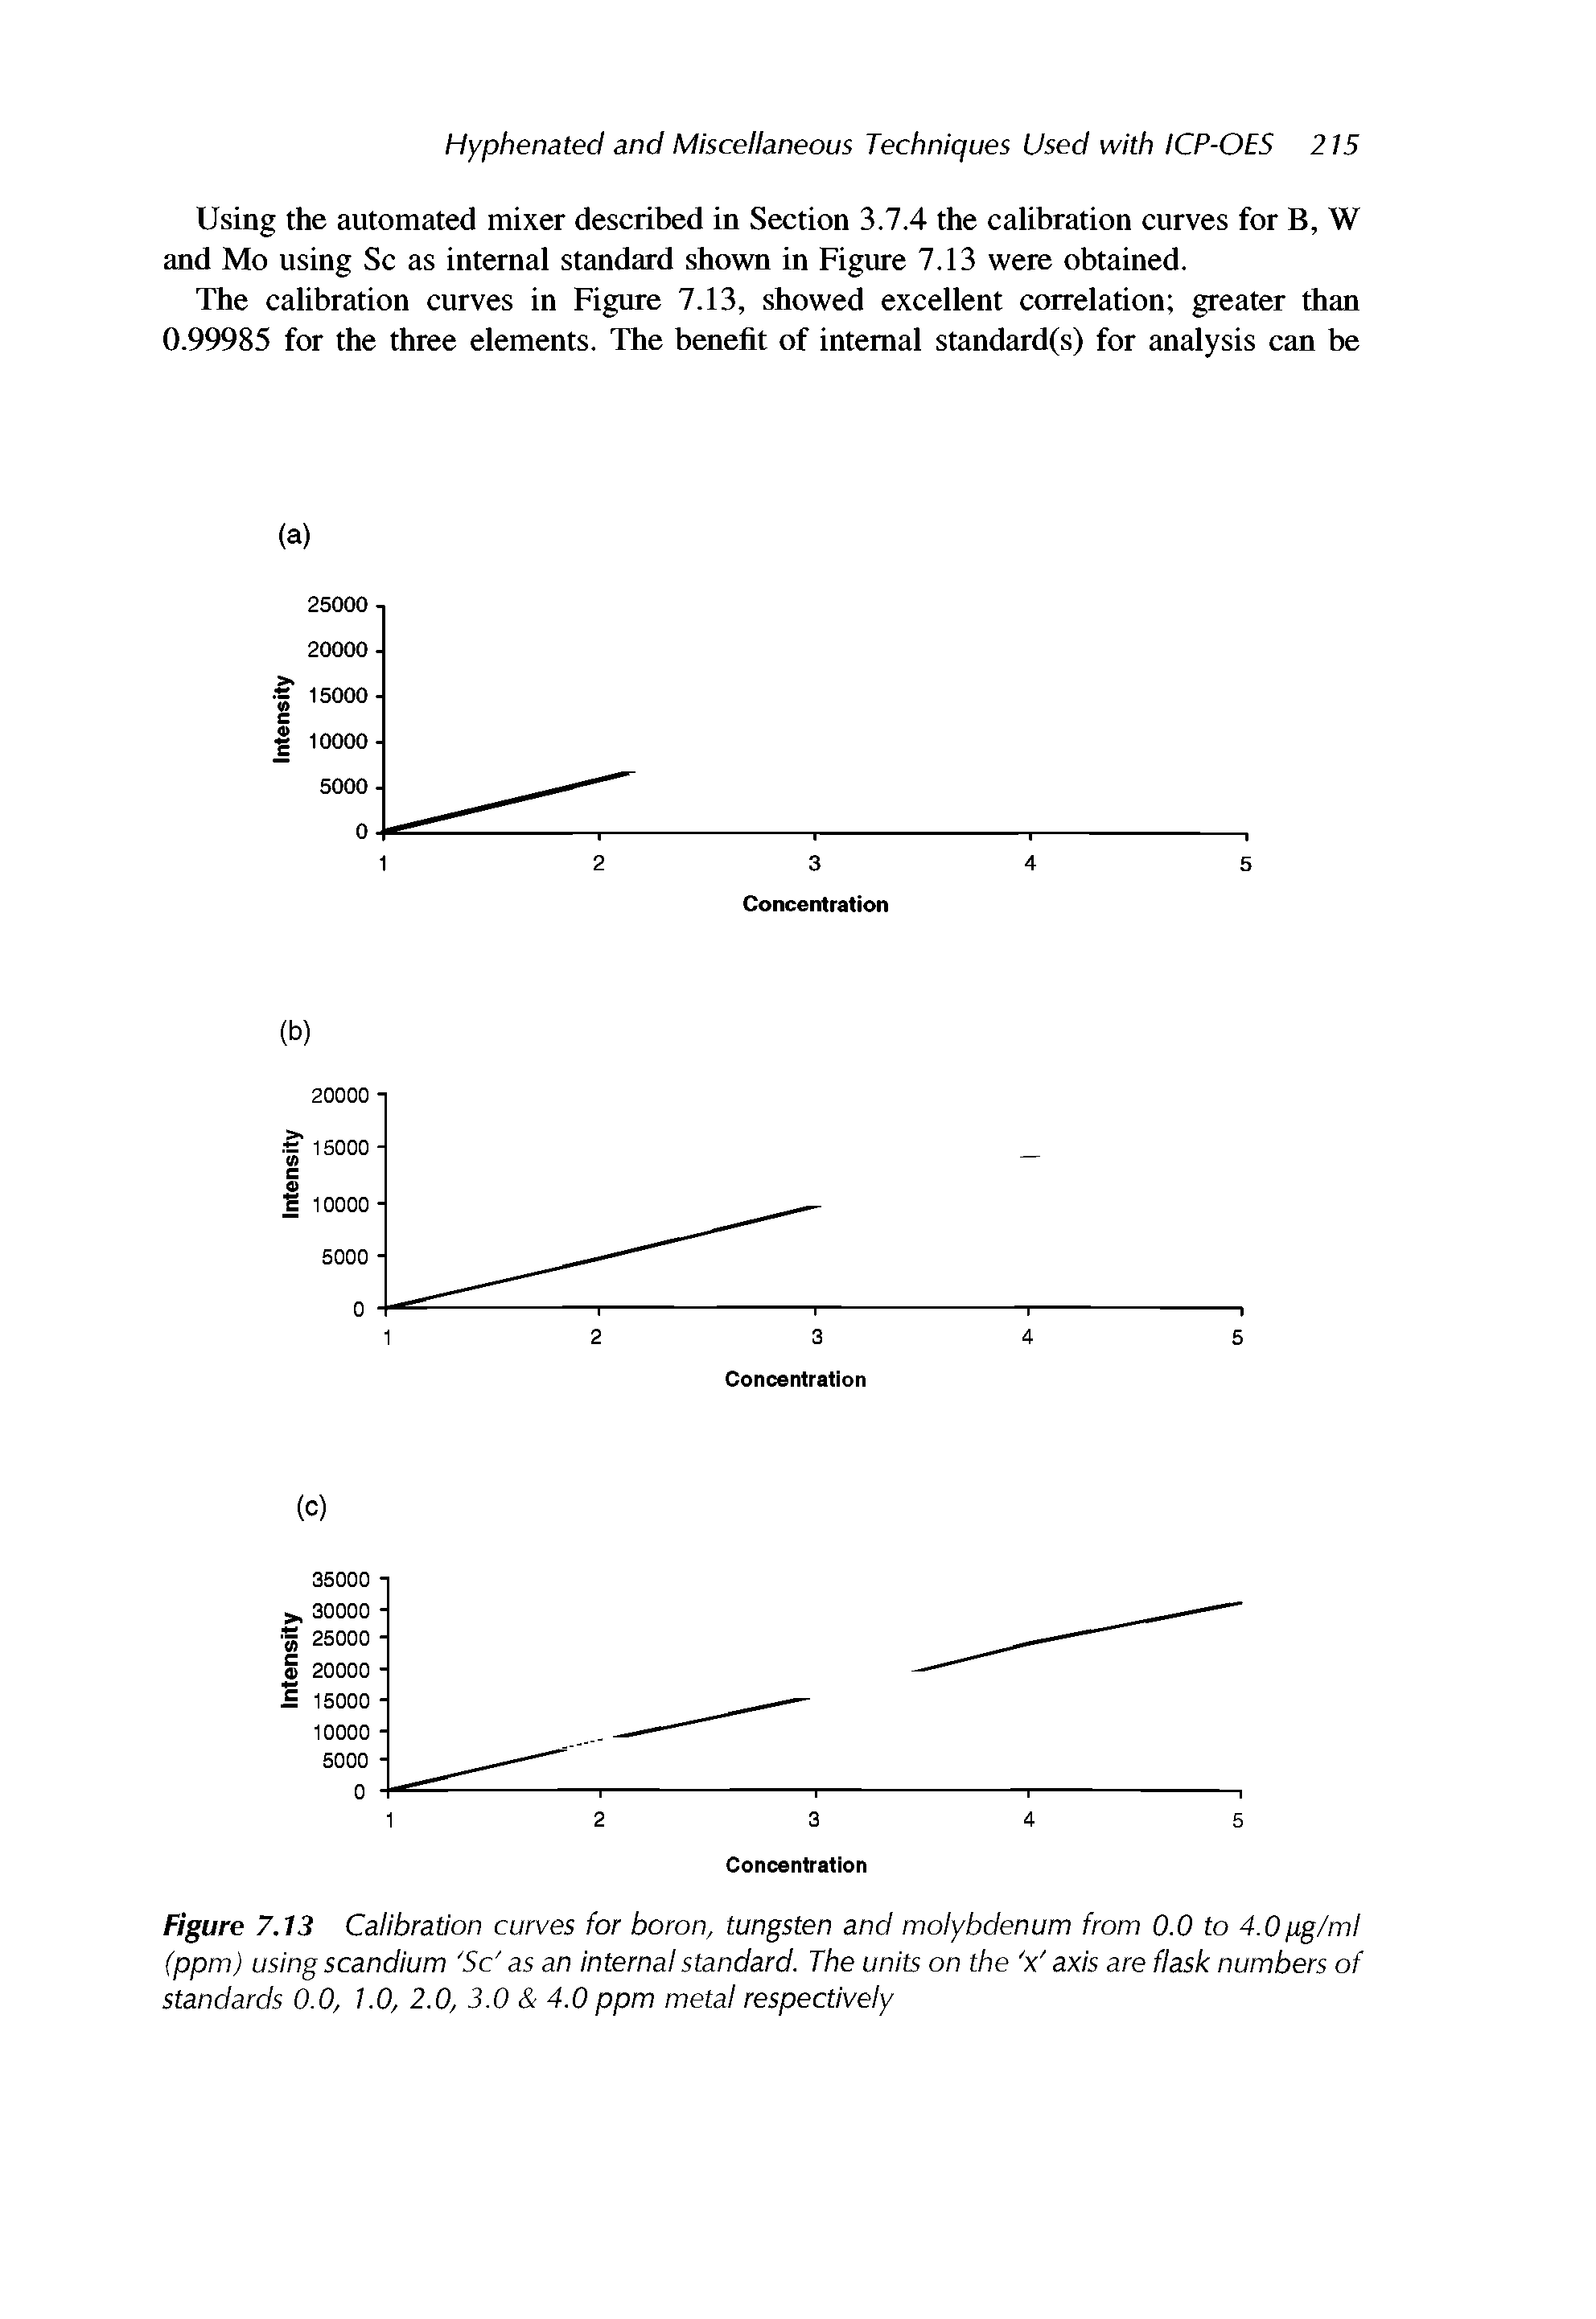 Figure 7.13 Calibration curves for boron, tungsten and molybdenum from 0.0 to 4.0gg/ml (ppm) using scandium Sc as an internal standard. The units on the Y axis are flask numbers of standards 0.0, 1.0, 2.0, 3.0 4.0 ppm metal respectively...